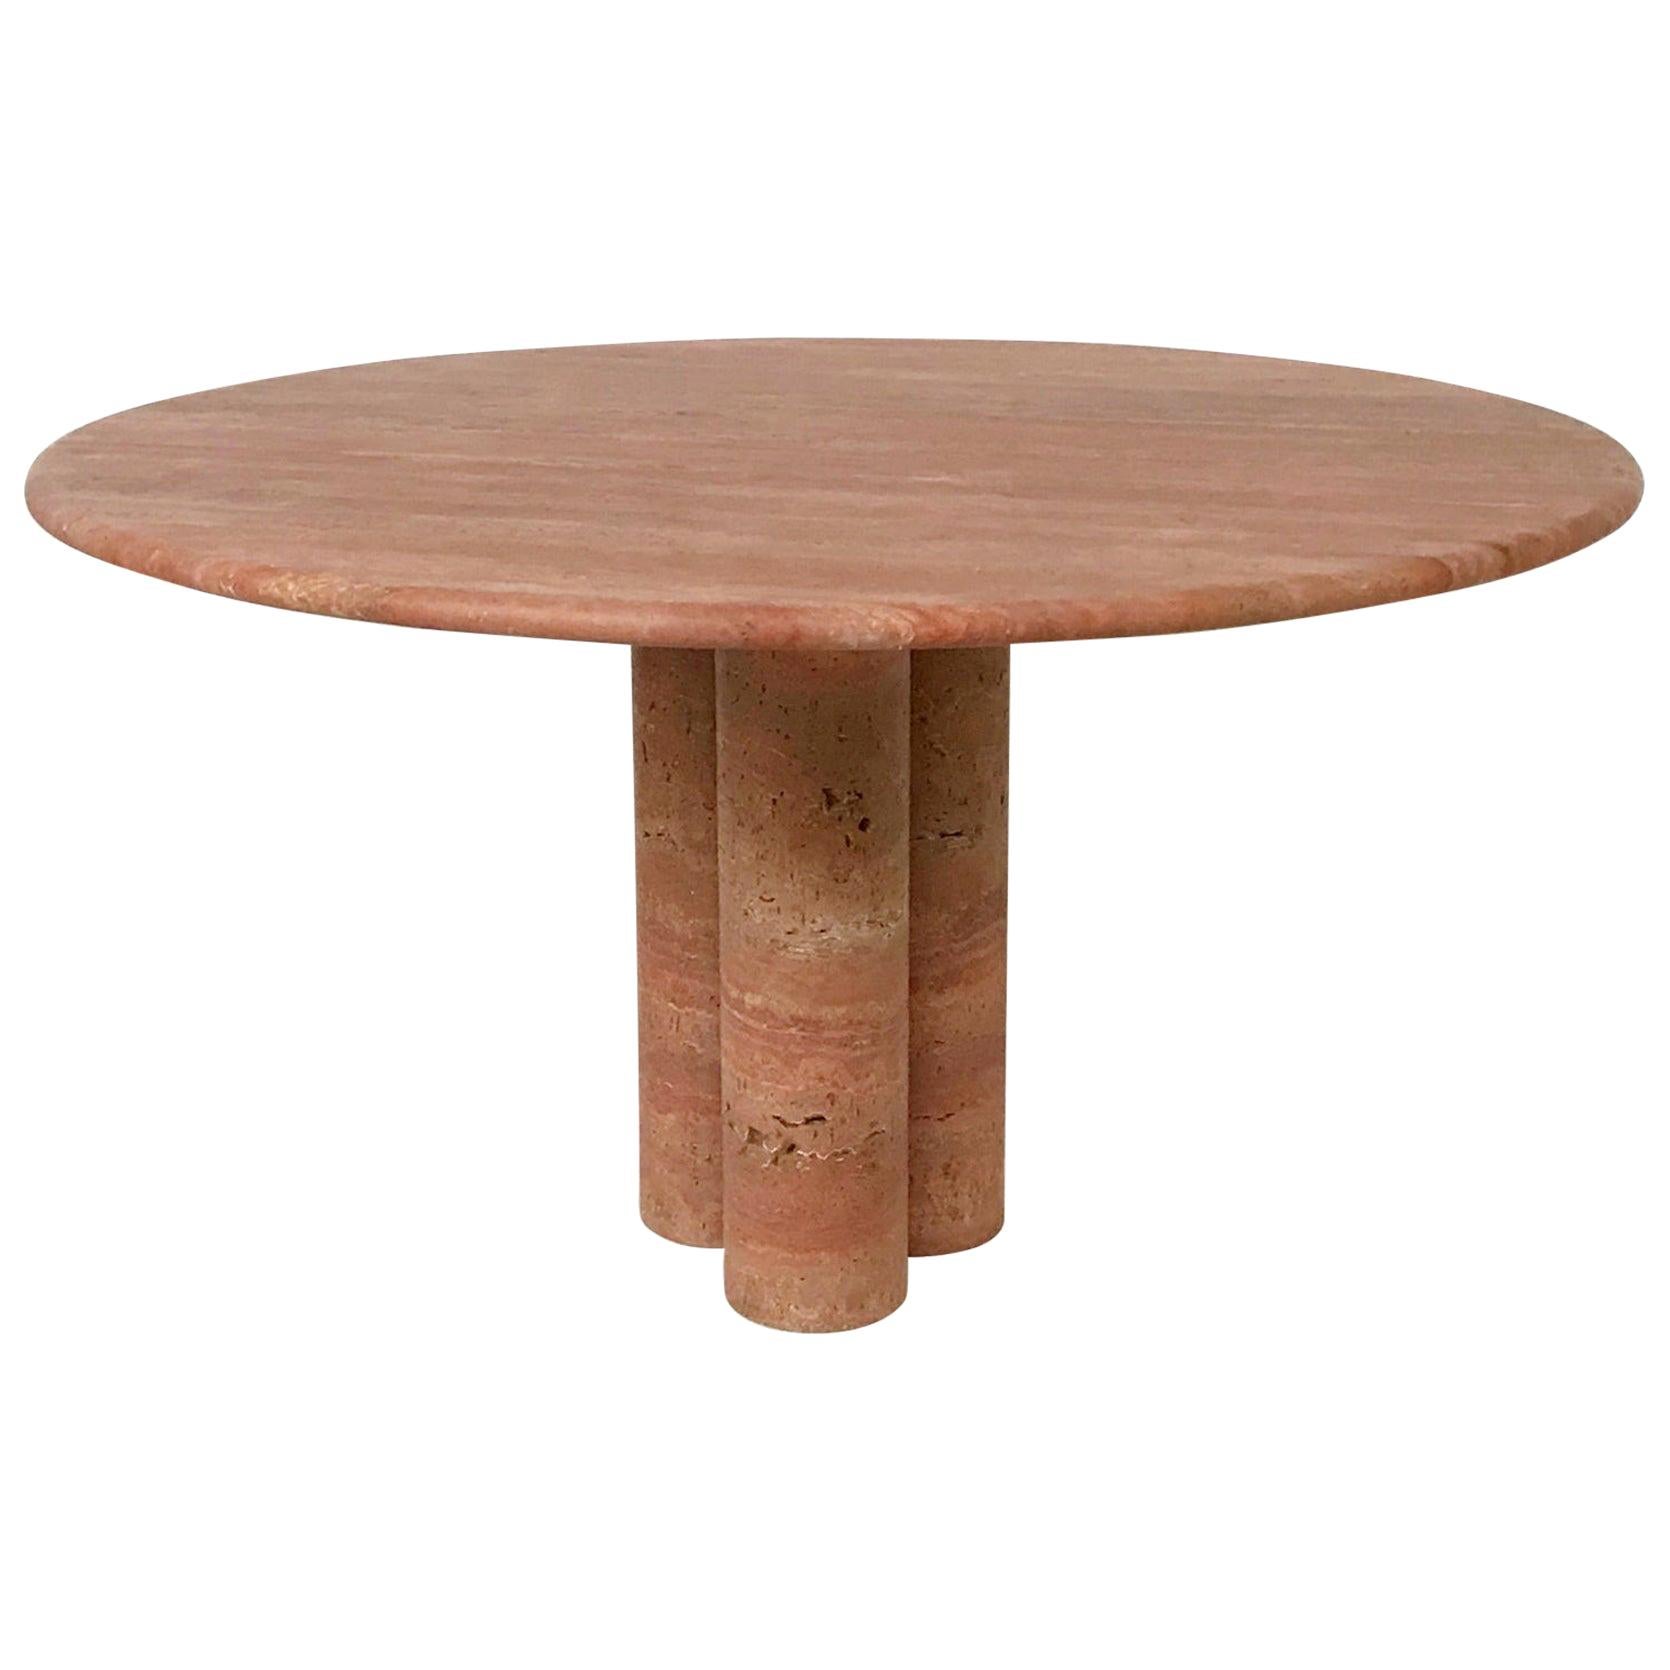 Red Travertine Dining Table by Mario Bellini